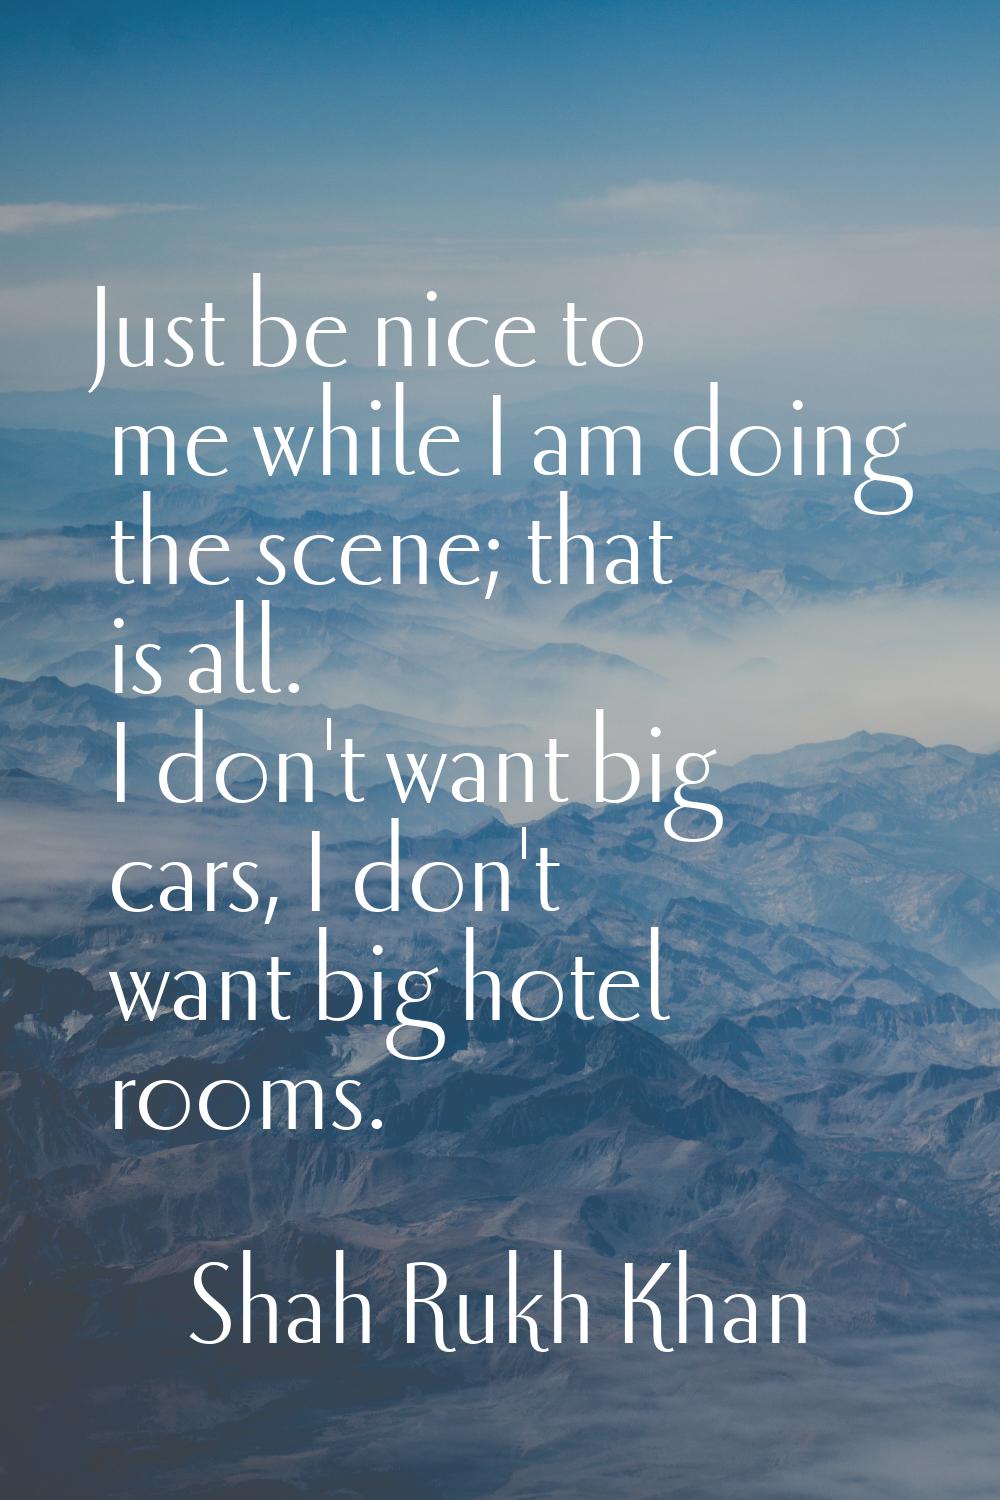 Just be nice to me while I am doing the scene; that is all. I don't want big cars, I don't want big